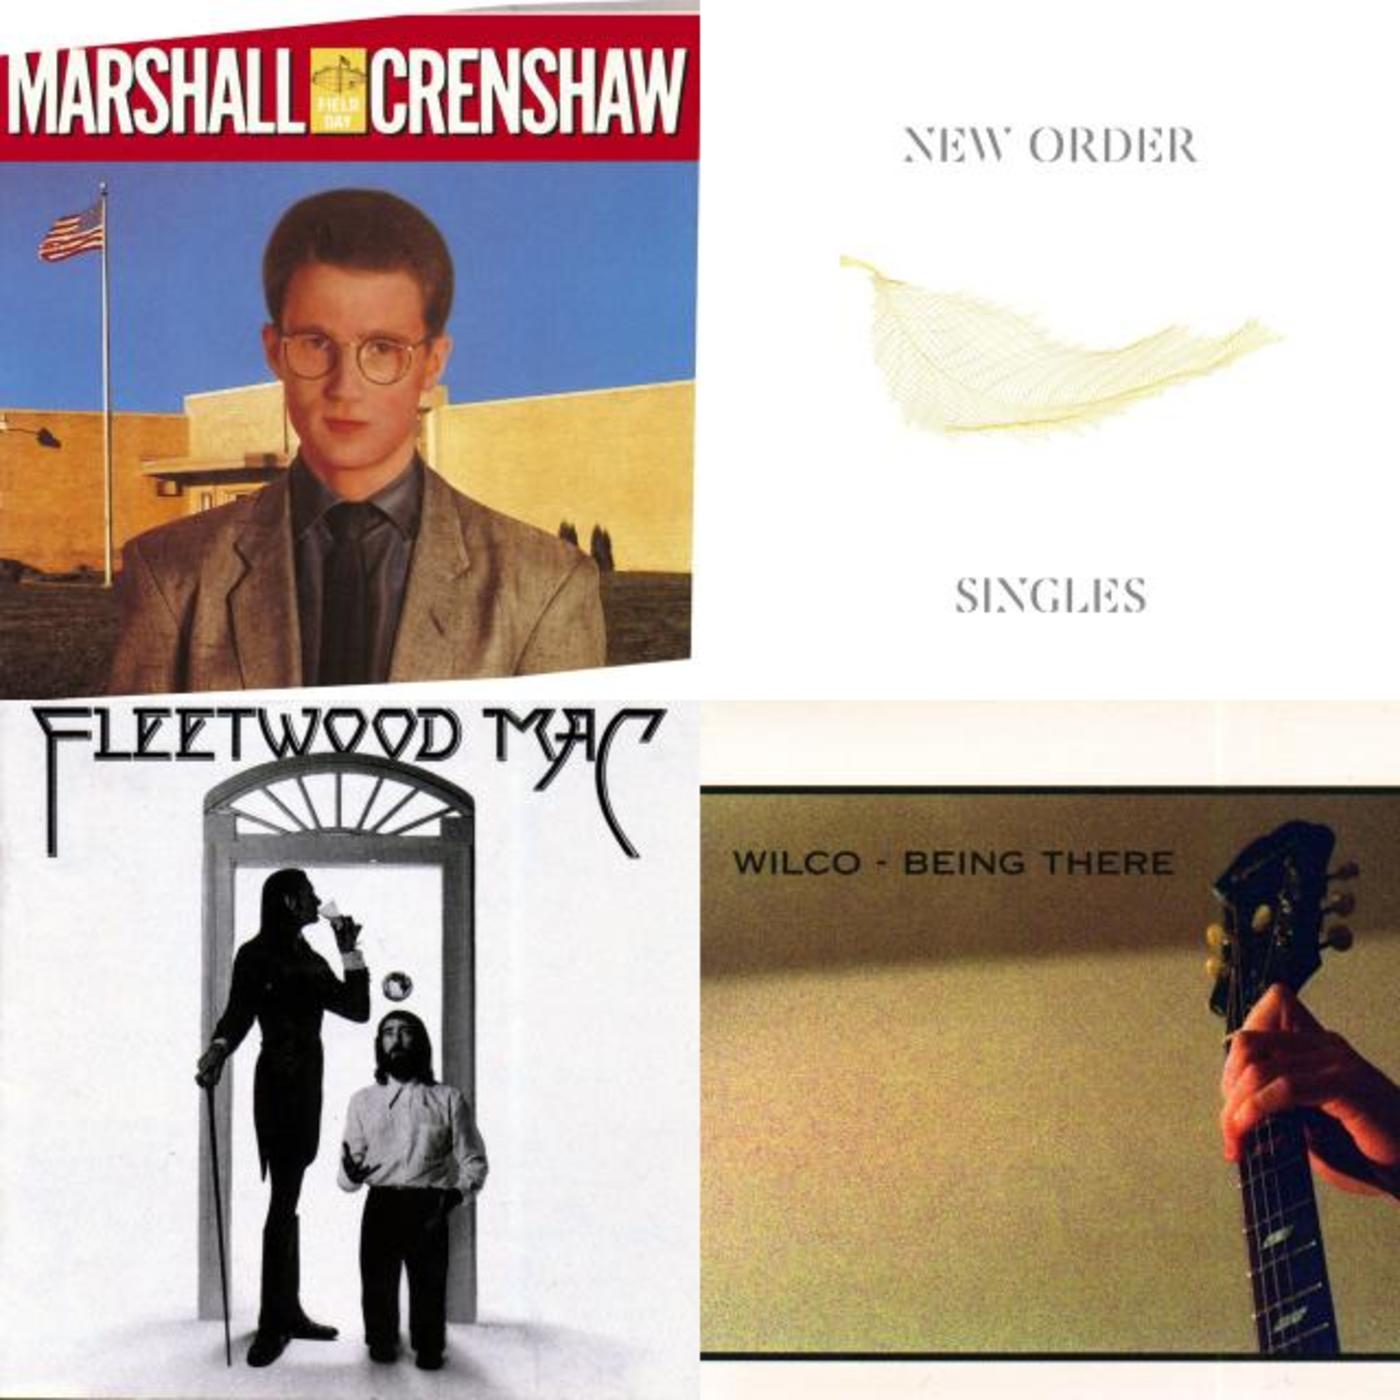 Every Day of the Week - New Order, Wilco, Fleetwood Mac, Marshall Crenshaw, Ry Cooder, Duane Eddy, Freddie King, Della Rese, Tori Amos, Death Cab For Cutie, The Pogues, Steve Wynn